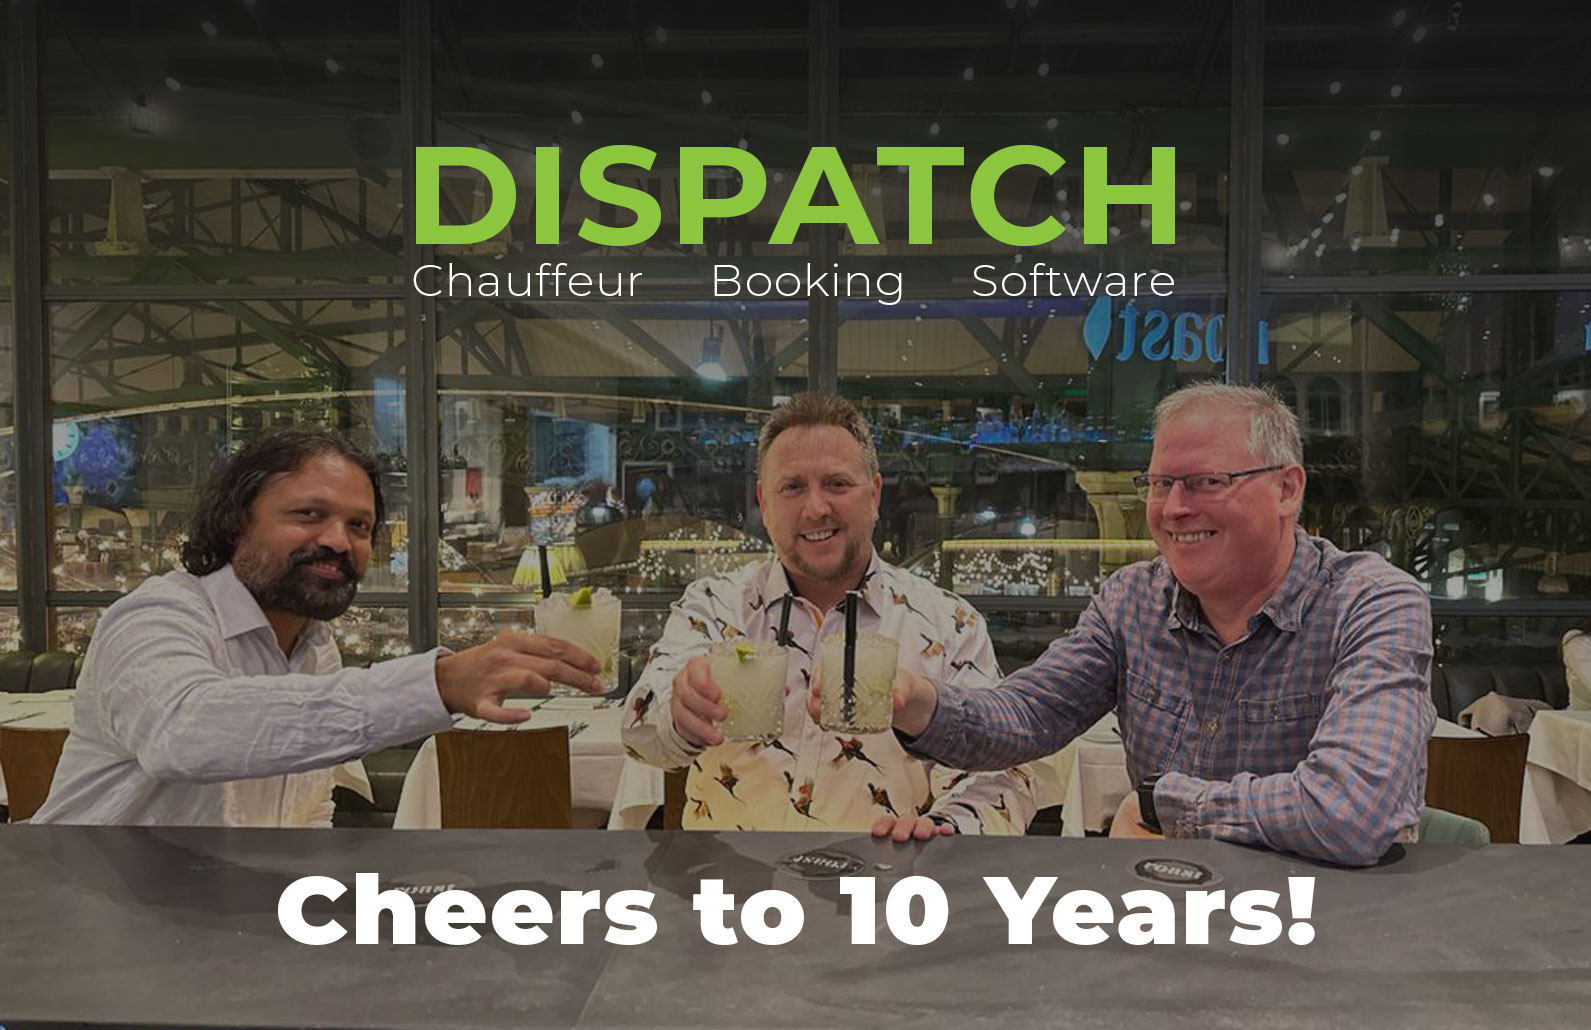 DISPATCH Chauffeur Booking Software - Cheers to 10 Years!